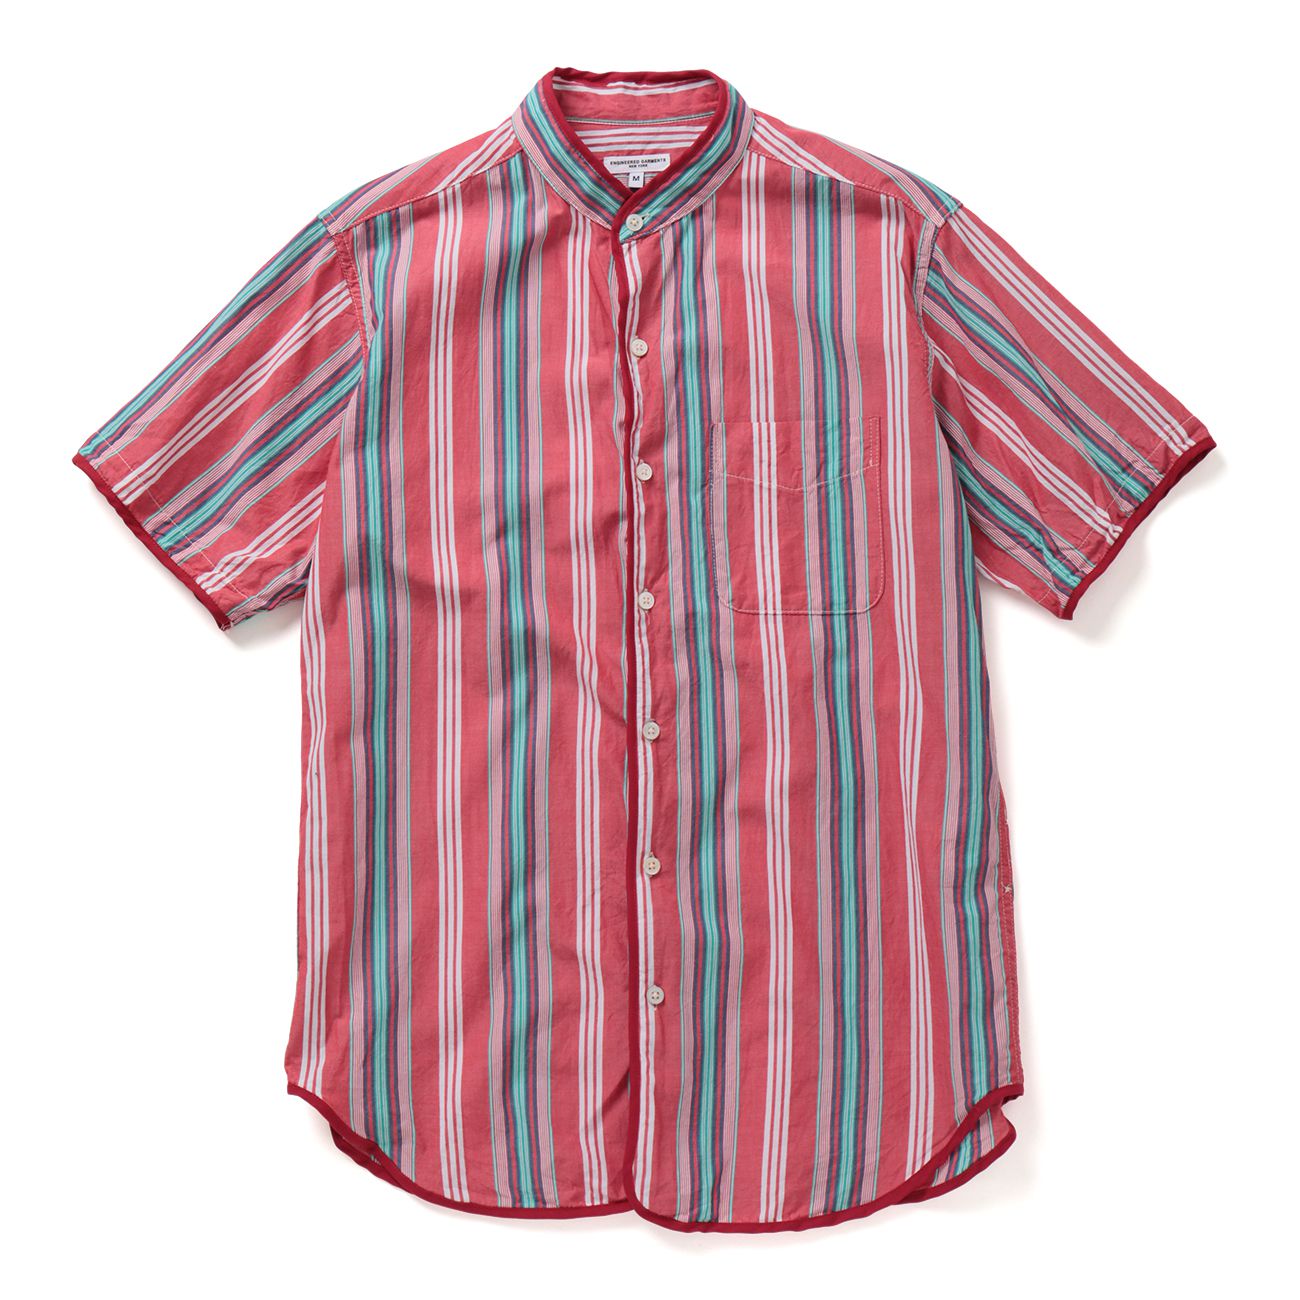 ENGINEERED GARMENTS-Copley Shirt - Multi Color St. - Red